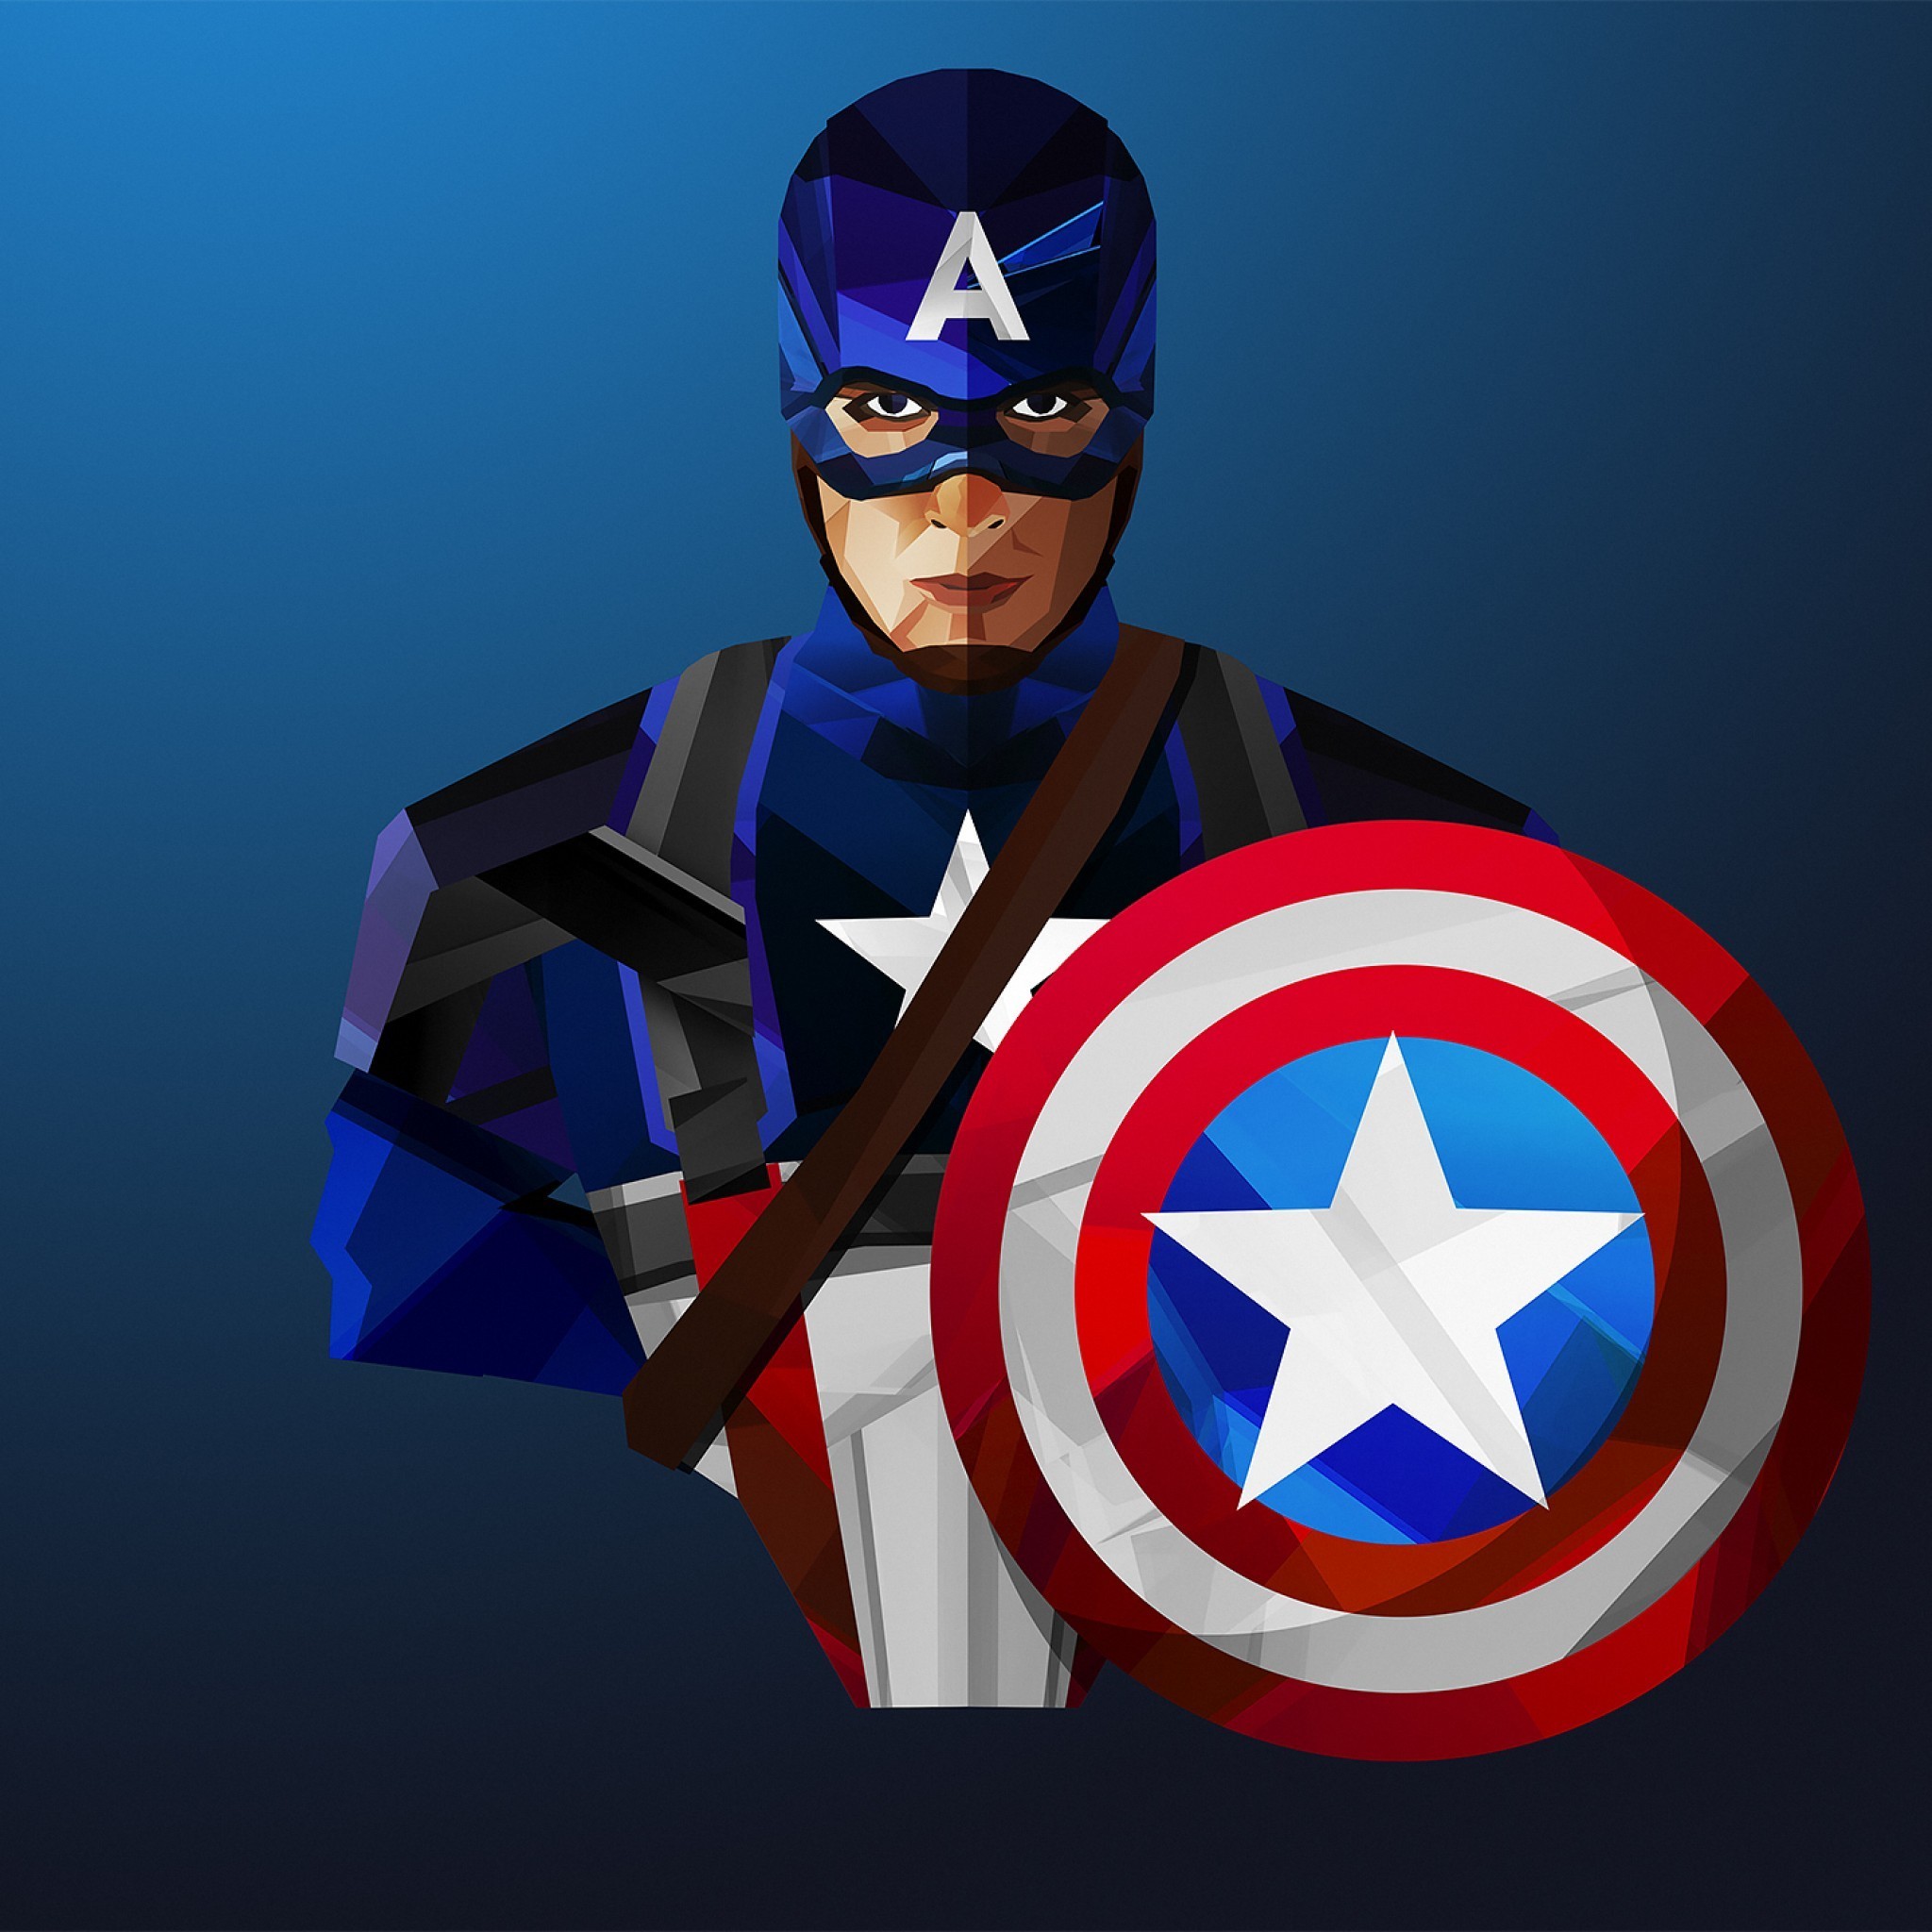 Hd Wallpapers For Pc Captain America